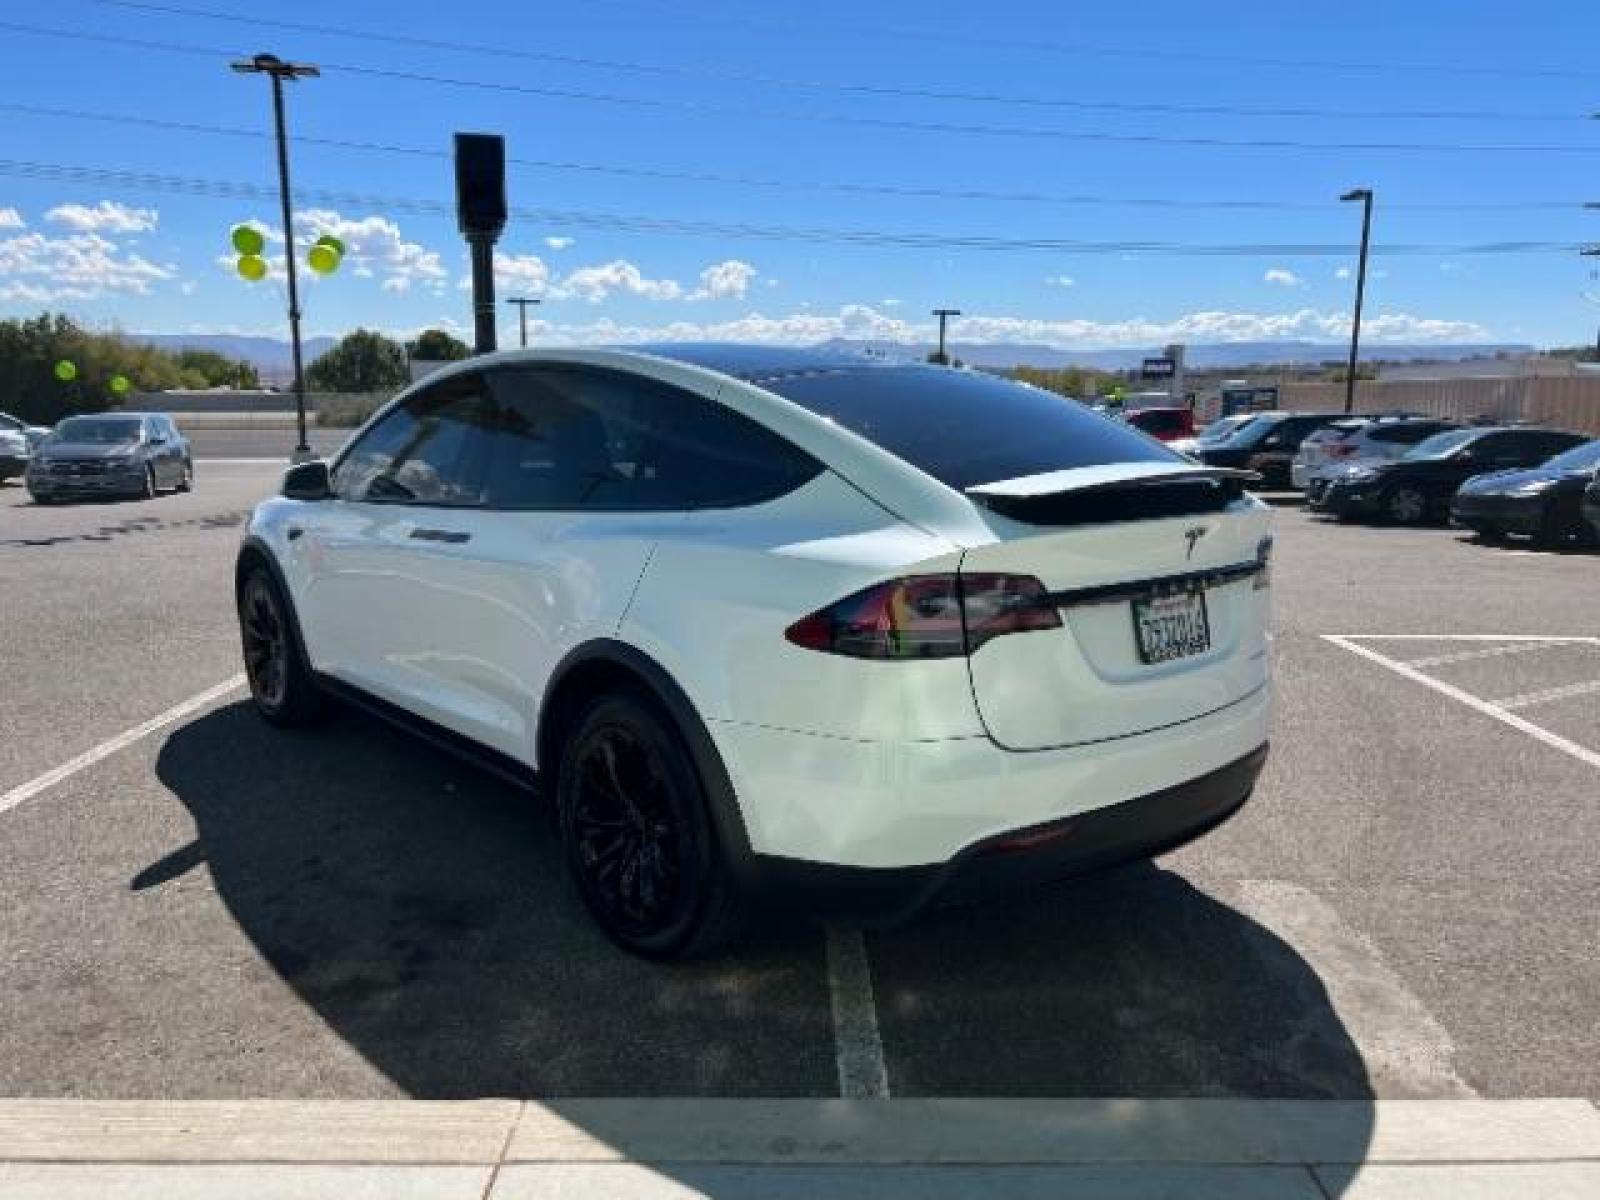 2019 Pearl White Multi-Coat /All Black, leatherette Tesla Model X Standard Range (5YJXCAE21KF) with an ELECTRIC engine, 1-Speed Automatic transmission, located at 1865 East Red Hills Pkwy, St. George, 84770, (435) 628-0023, 37.120850, -113.543640 - AWD, 7 Seats, Autopilot, Raven, Cold weather package, Adaptive suspension, Tow hitch, 2 remotes, FSD computer 3.0 upgrade. Gets 270 miles on a full charge. Black chrome delete vinyl (removeable). This is a beautiful 1 owner MX for way less money and less waiting compared to ordering from Tesla. Bump - Photo #5